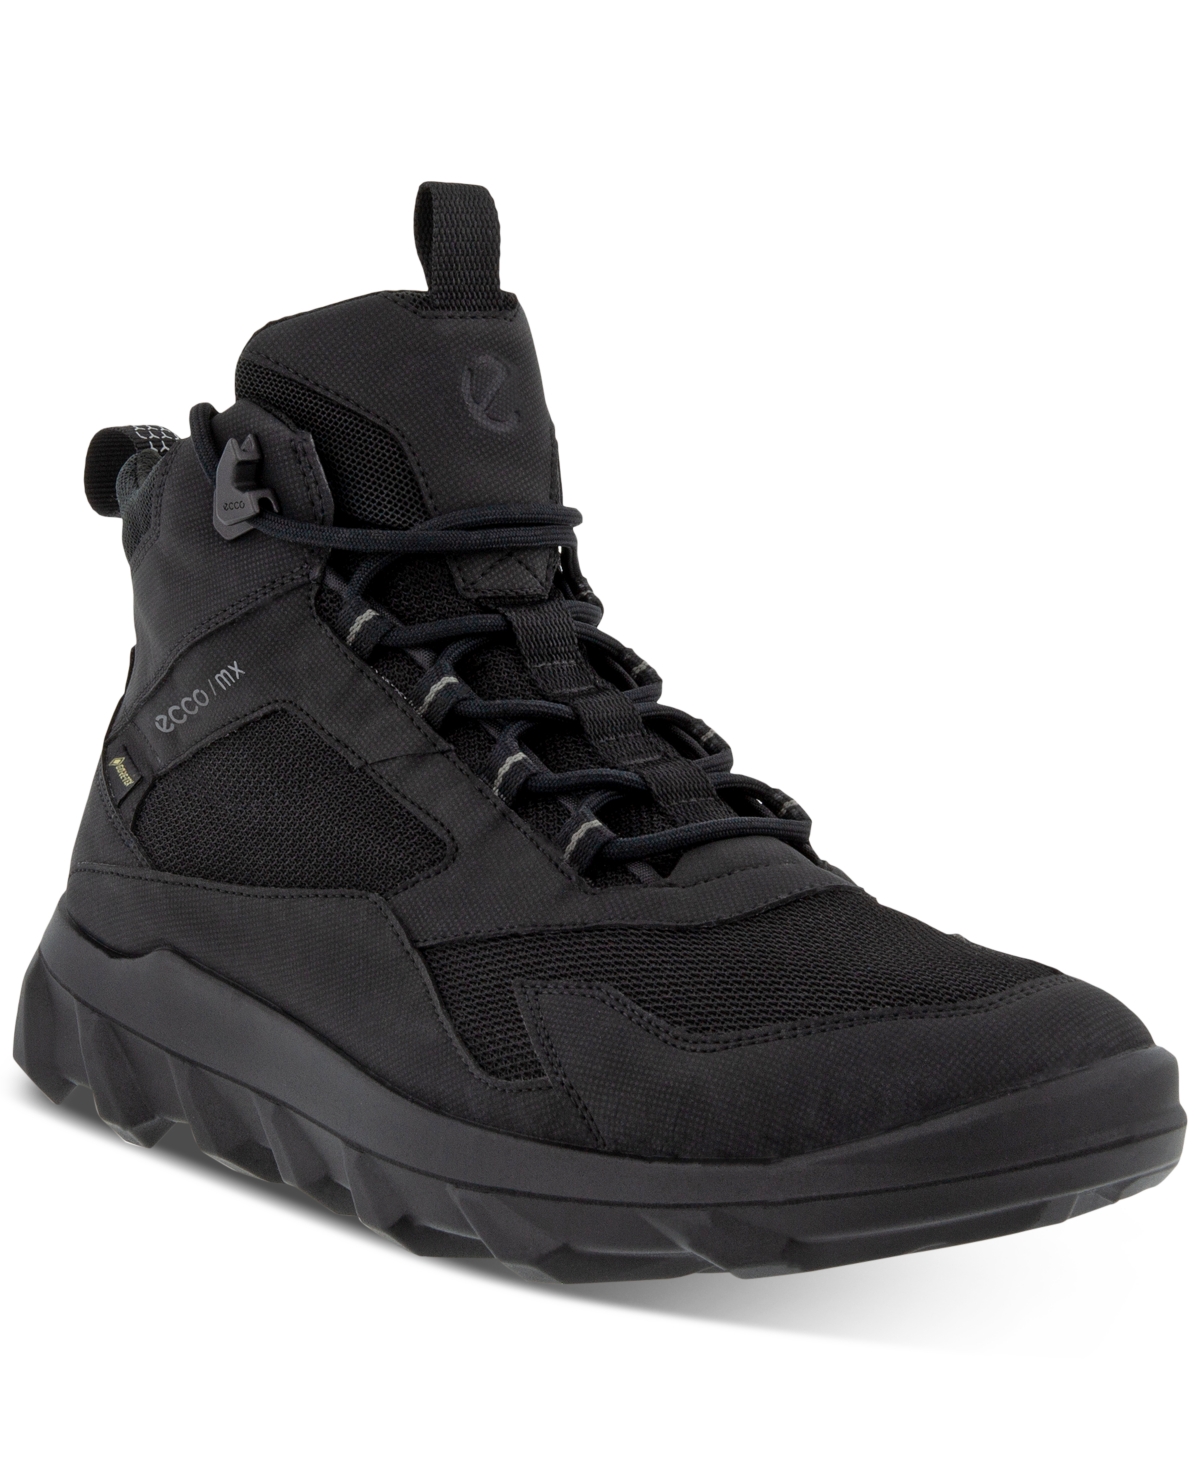 UPC 194890197459 product image for Ecco Men's Mx Mid Waterproof Lace-Up Hiking Boots Men's Shoes | upcitemdb.com